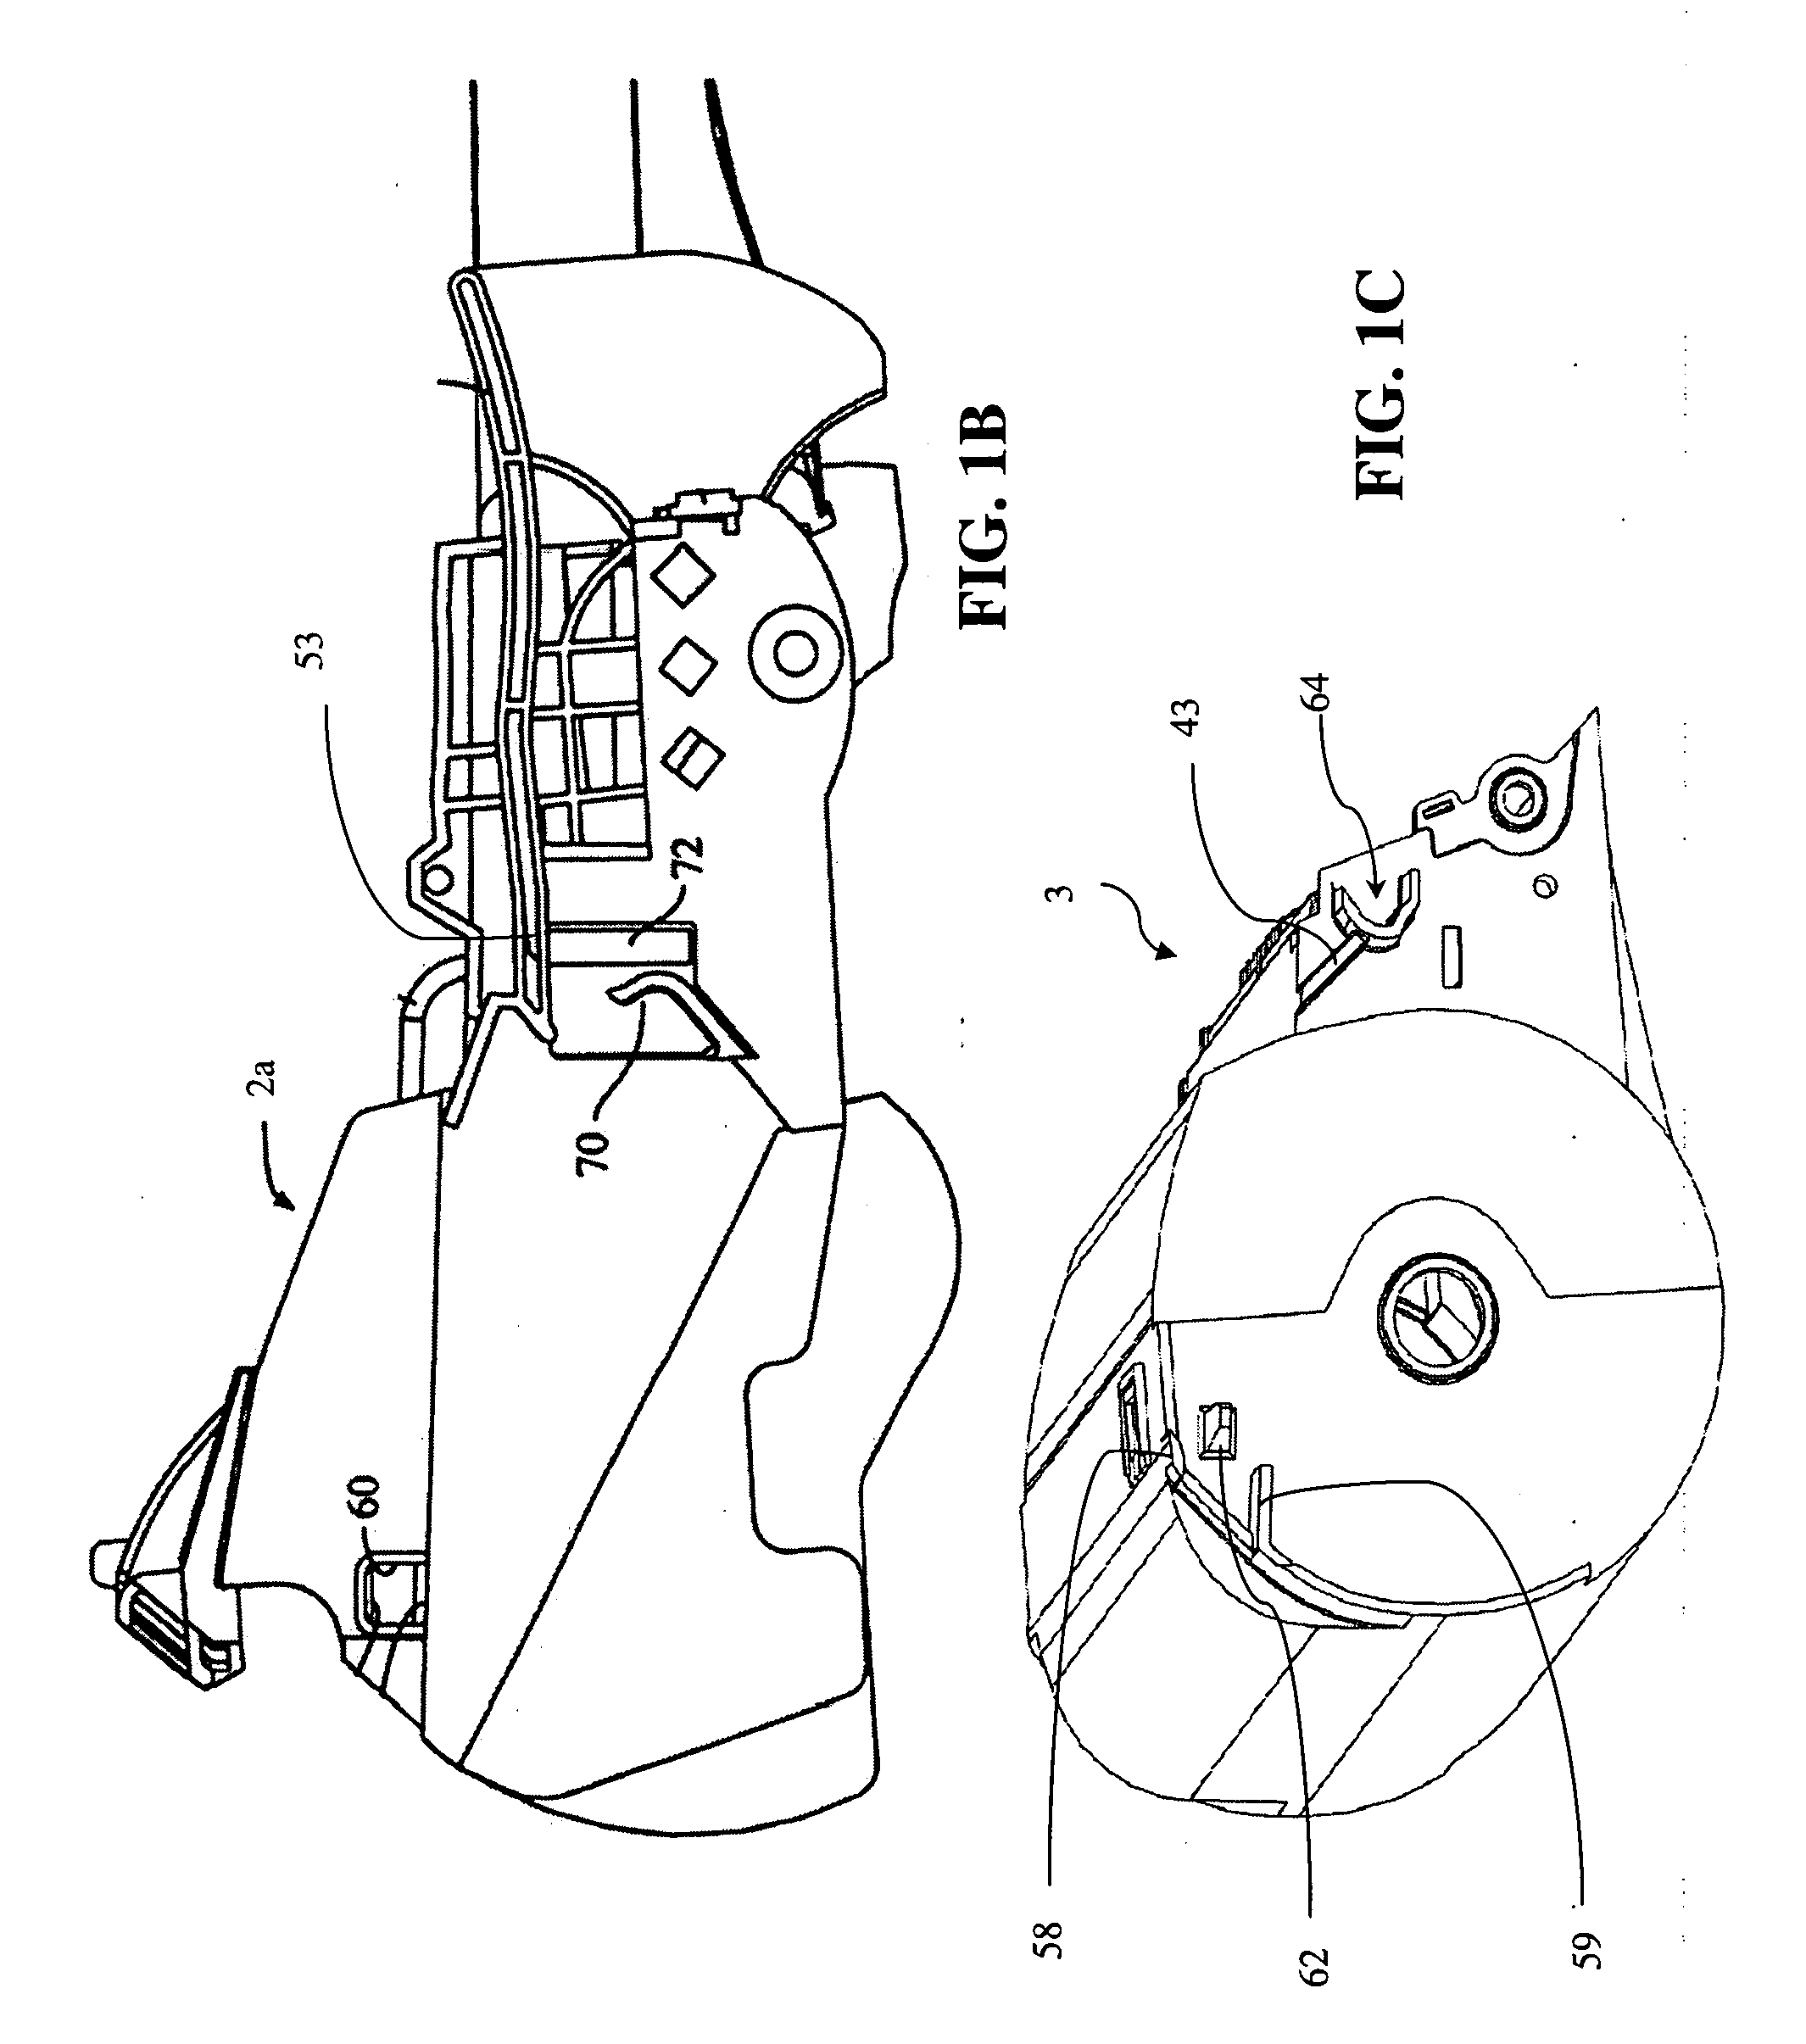 Imaging Cartridge Drive Having Entire Tooth Engagement